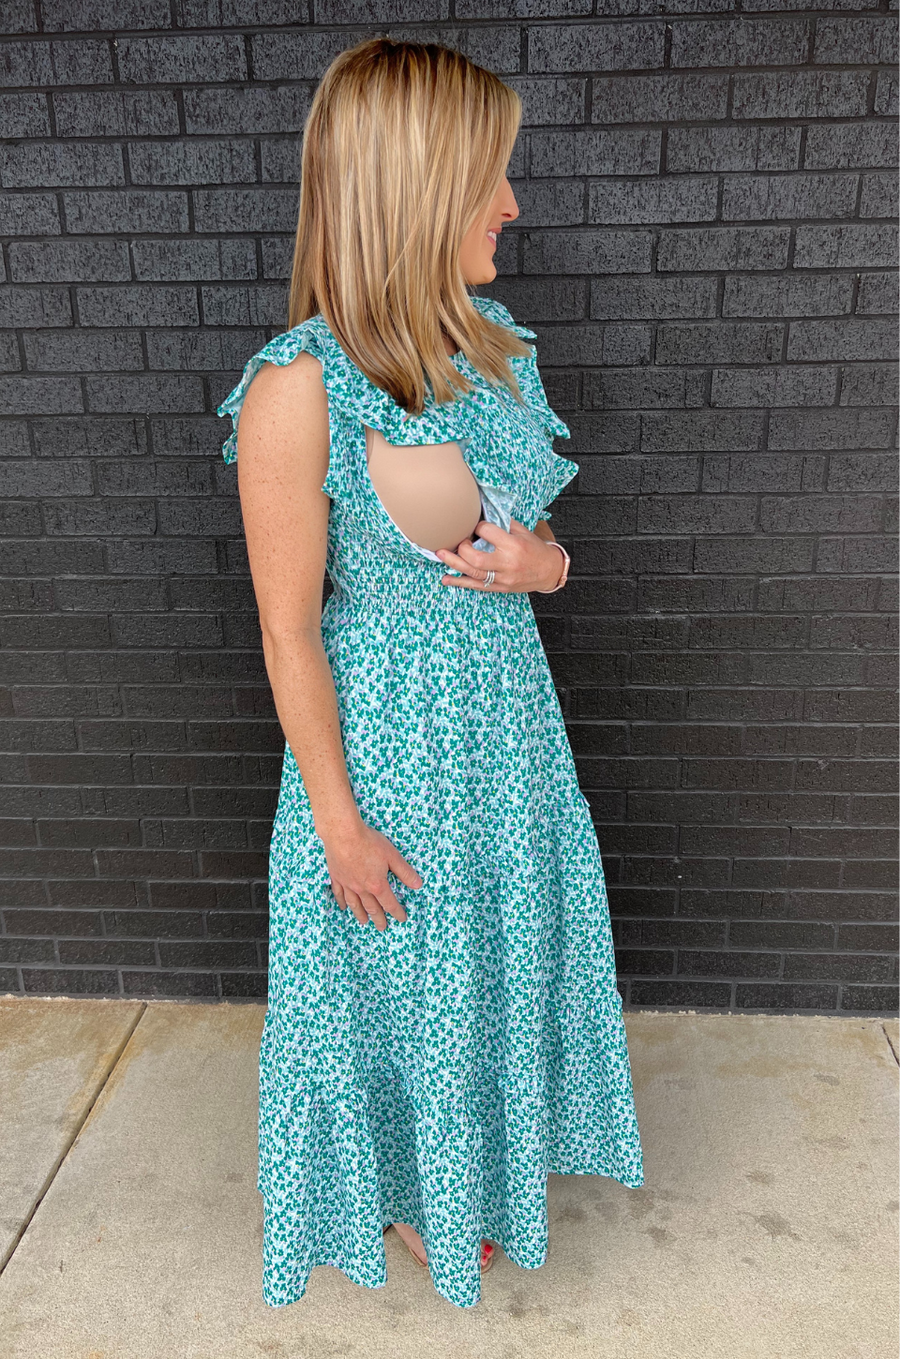 green dress with breastfeeding access